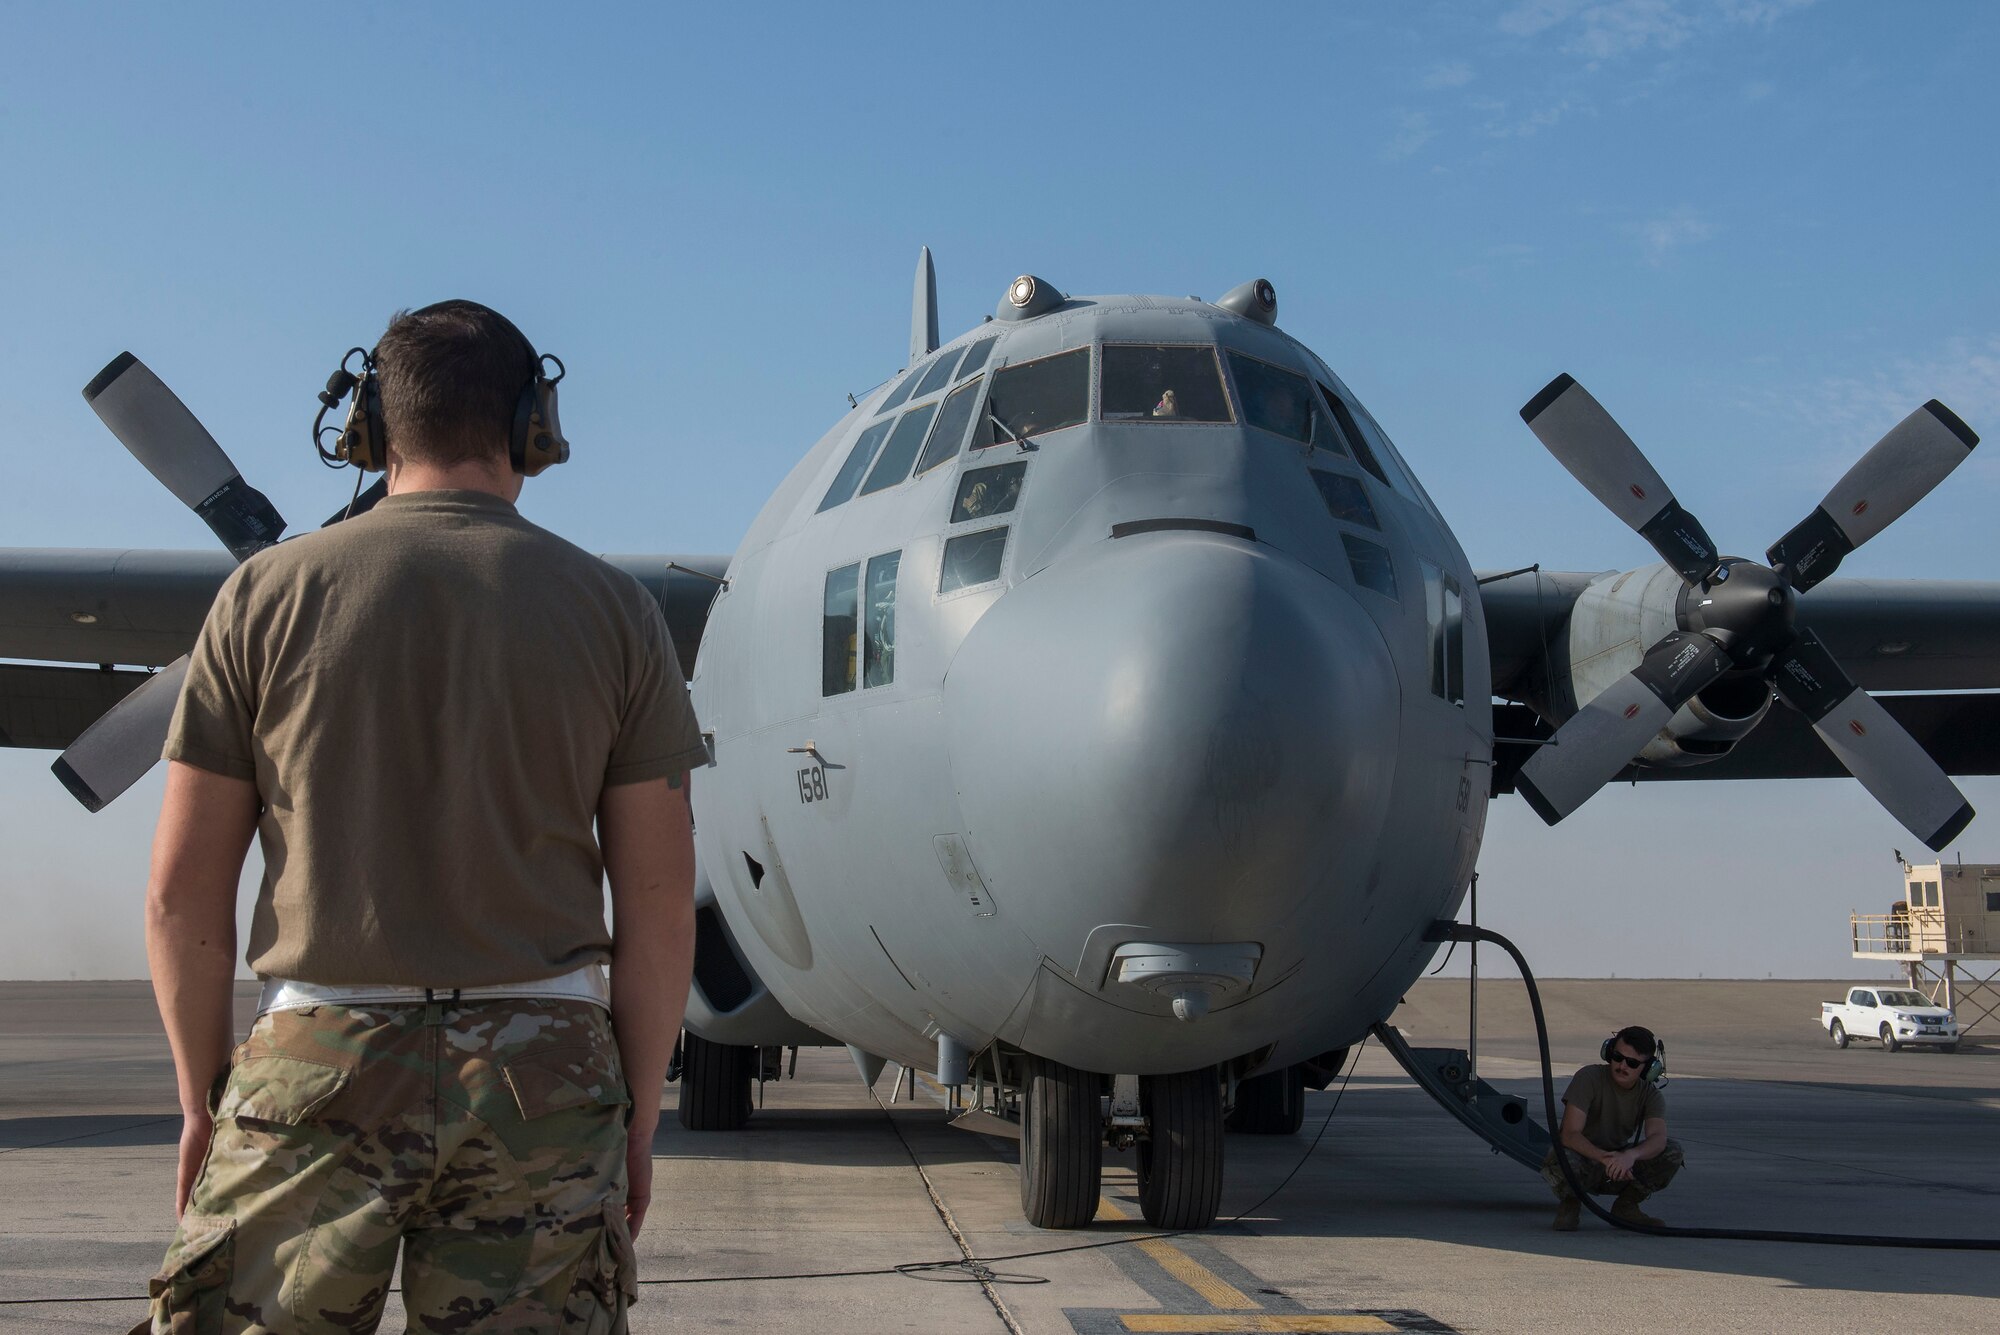 A U.S. Airman assigned to the 380th Expeditionary Maintenance Group performs pre-flight operations on an EC-130H Compass Call assigned to the 41st Expeditionary Electronic Combat Squadron during a rapid employment, defense, and survivability exercise at Al Dhafra Air Base, United Arab Emirates, Nov. 28, 2020.